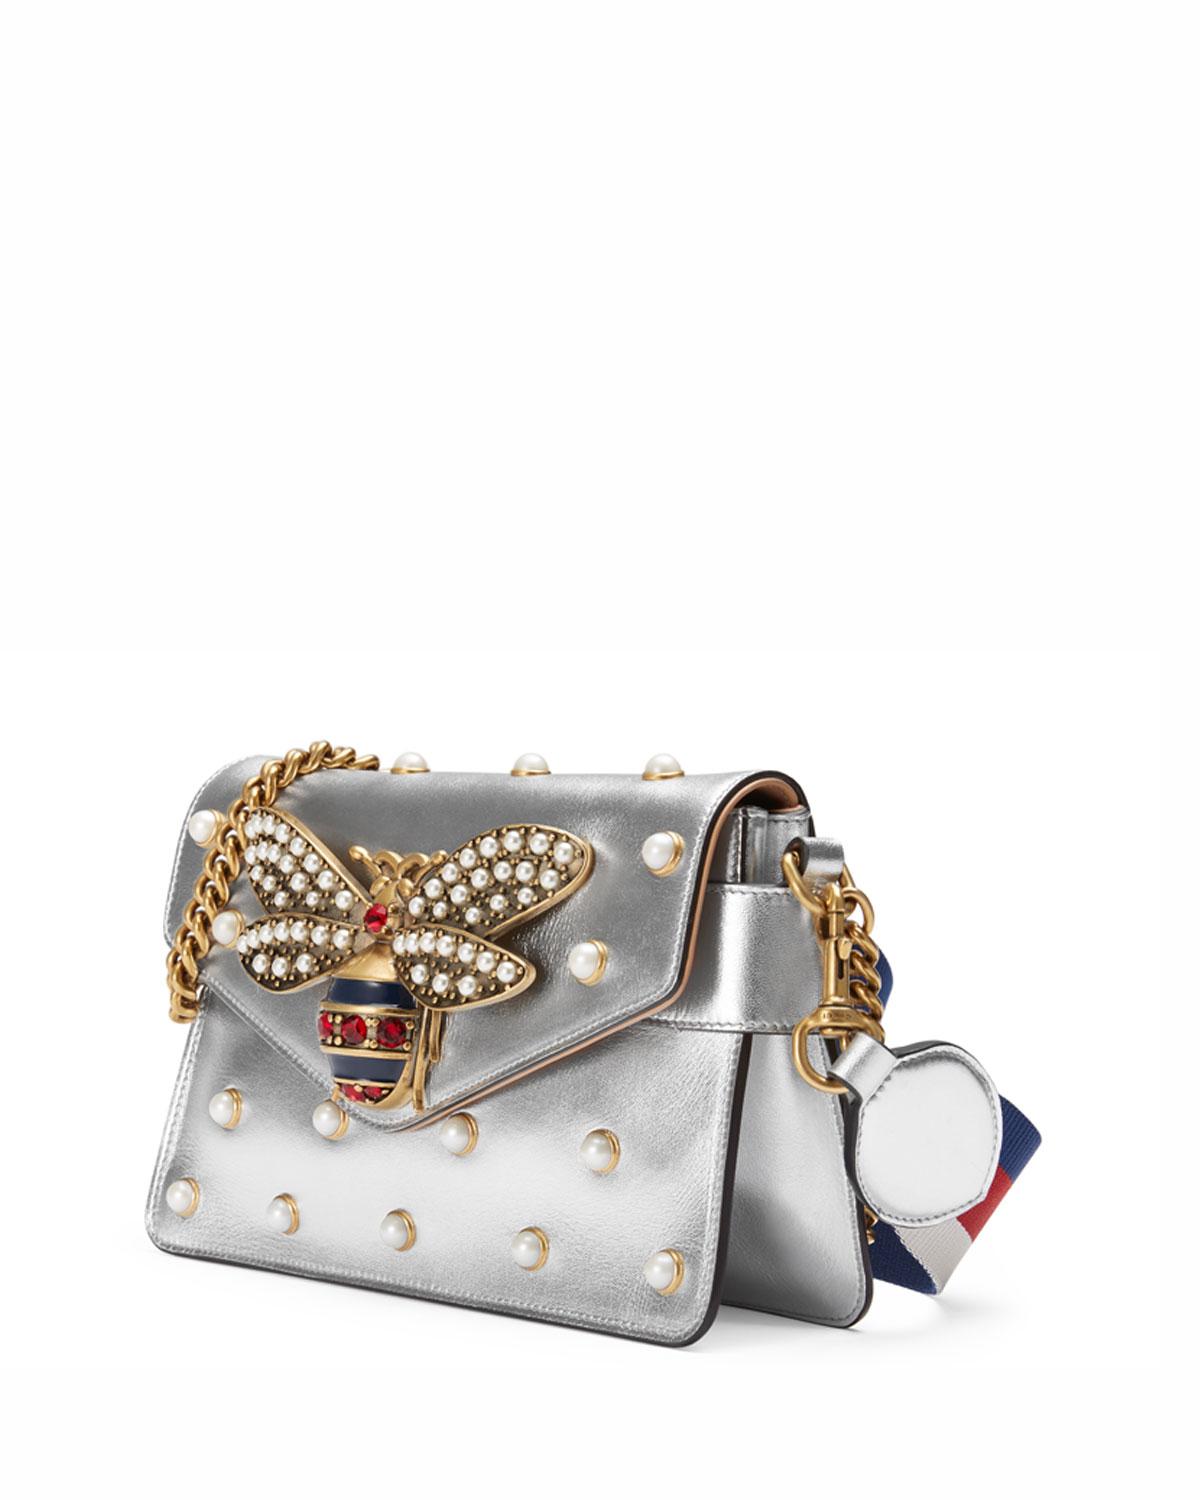 Lyst - Gucci Broadway Pearly Bee Shoulder Bag in Metallic